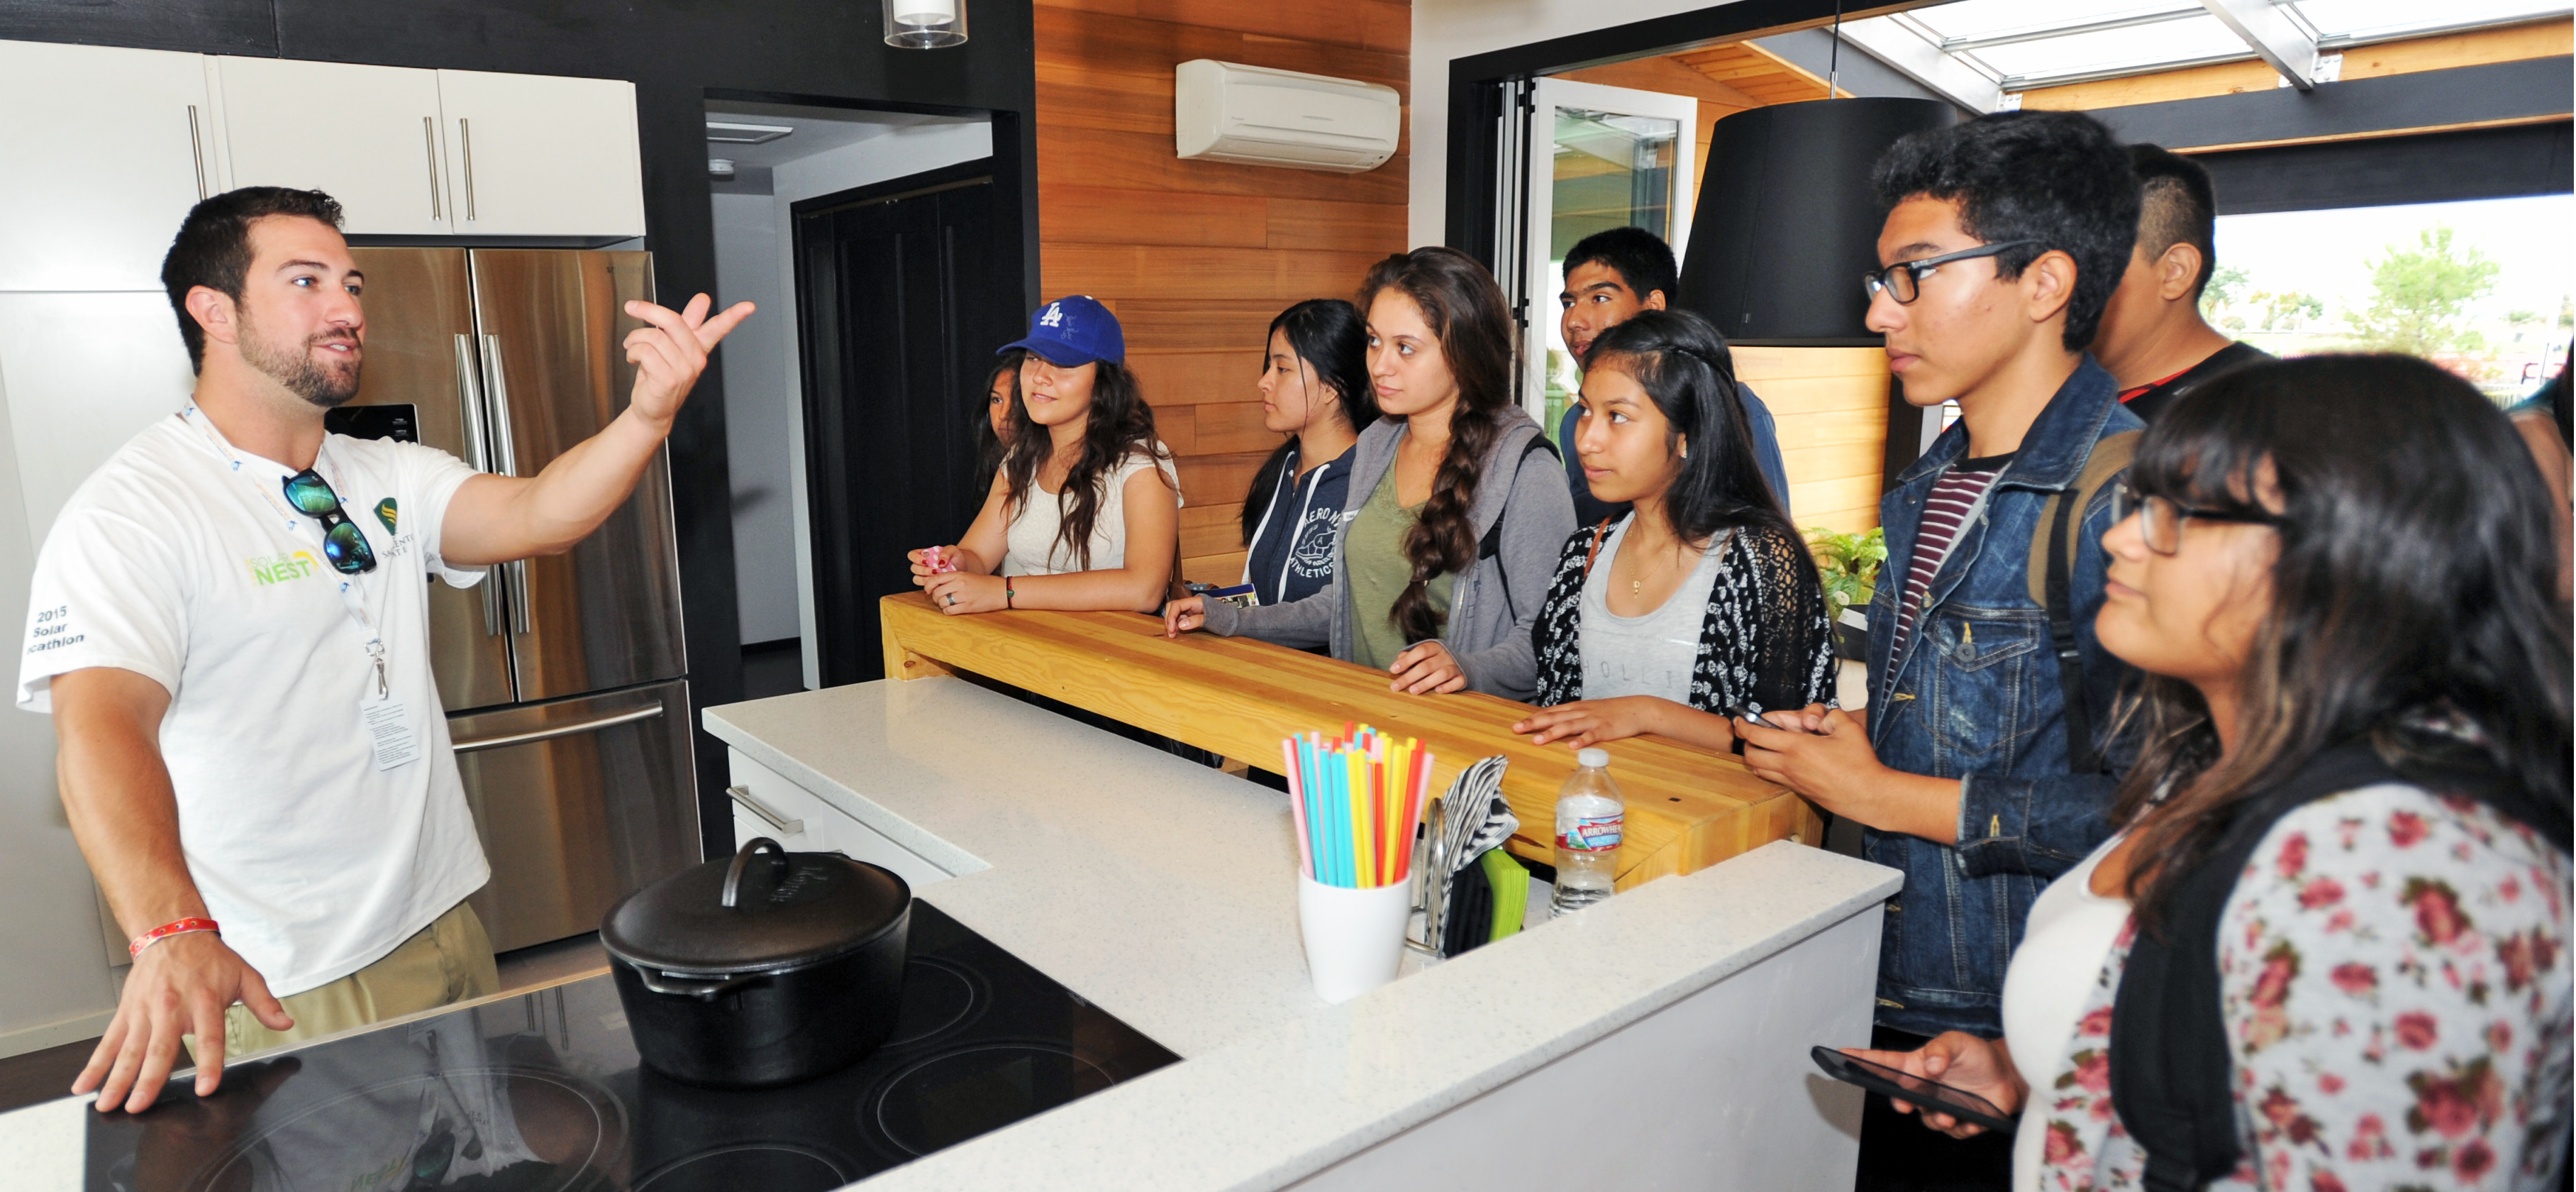 Solar Decathlon Pathways banner image. Blake Boyles (left) speaks to students from Bell Gardens High School in the kitchen of California State University, Sacramento, at the U.S. Department of Energy Solar Decathlon at the Orange County Great Park, Irvine, California, Oct. 15, 2015.